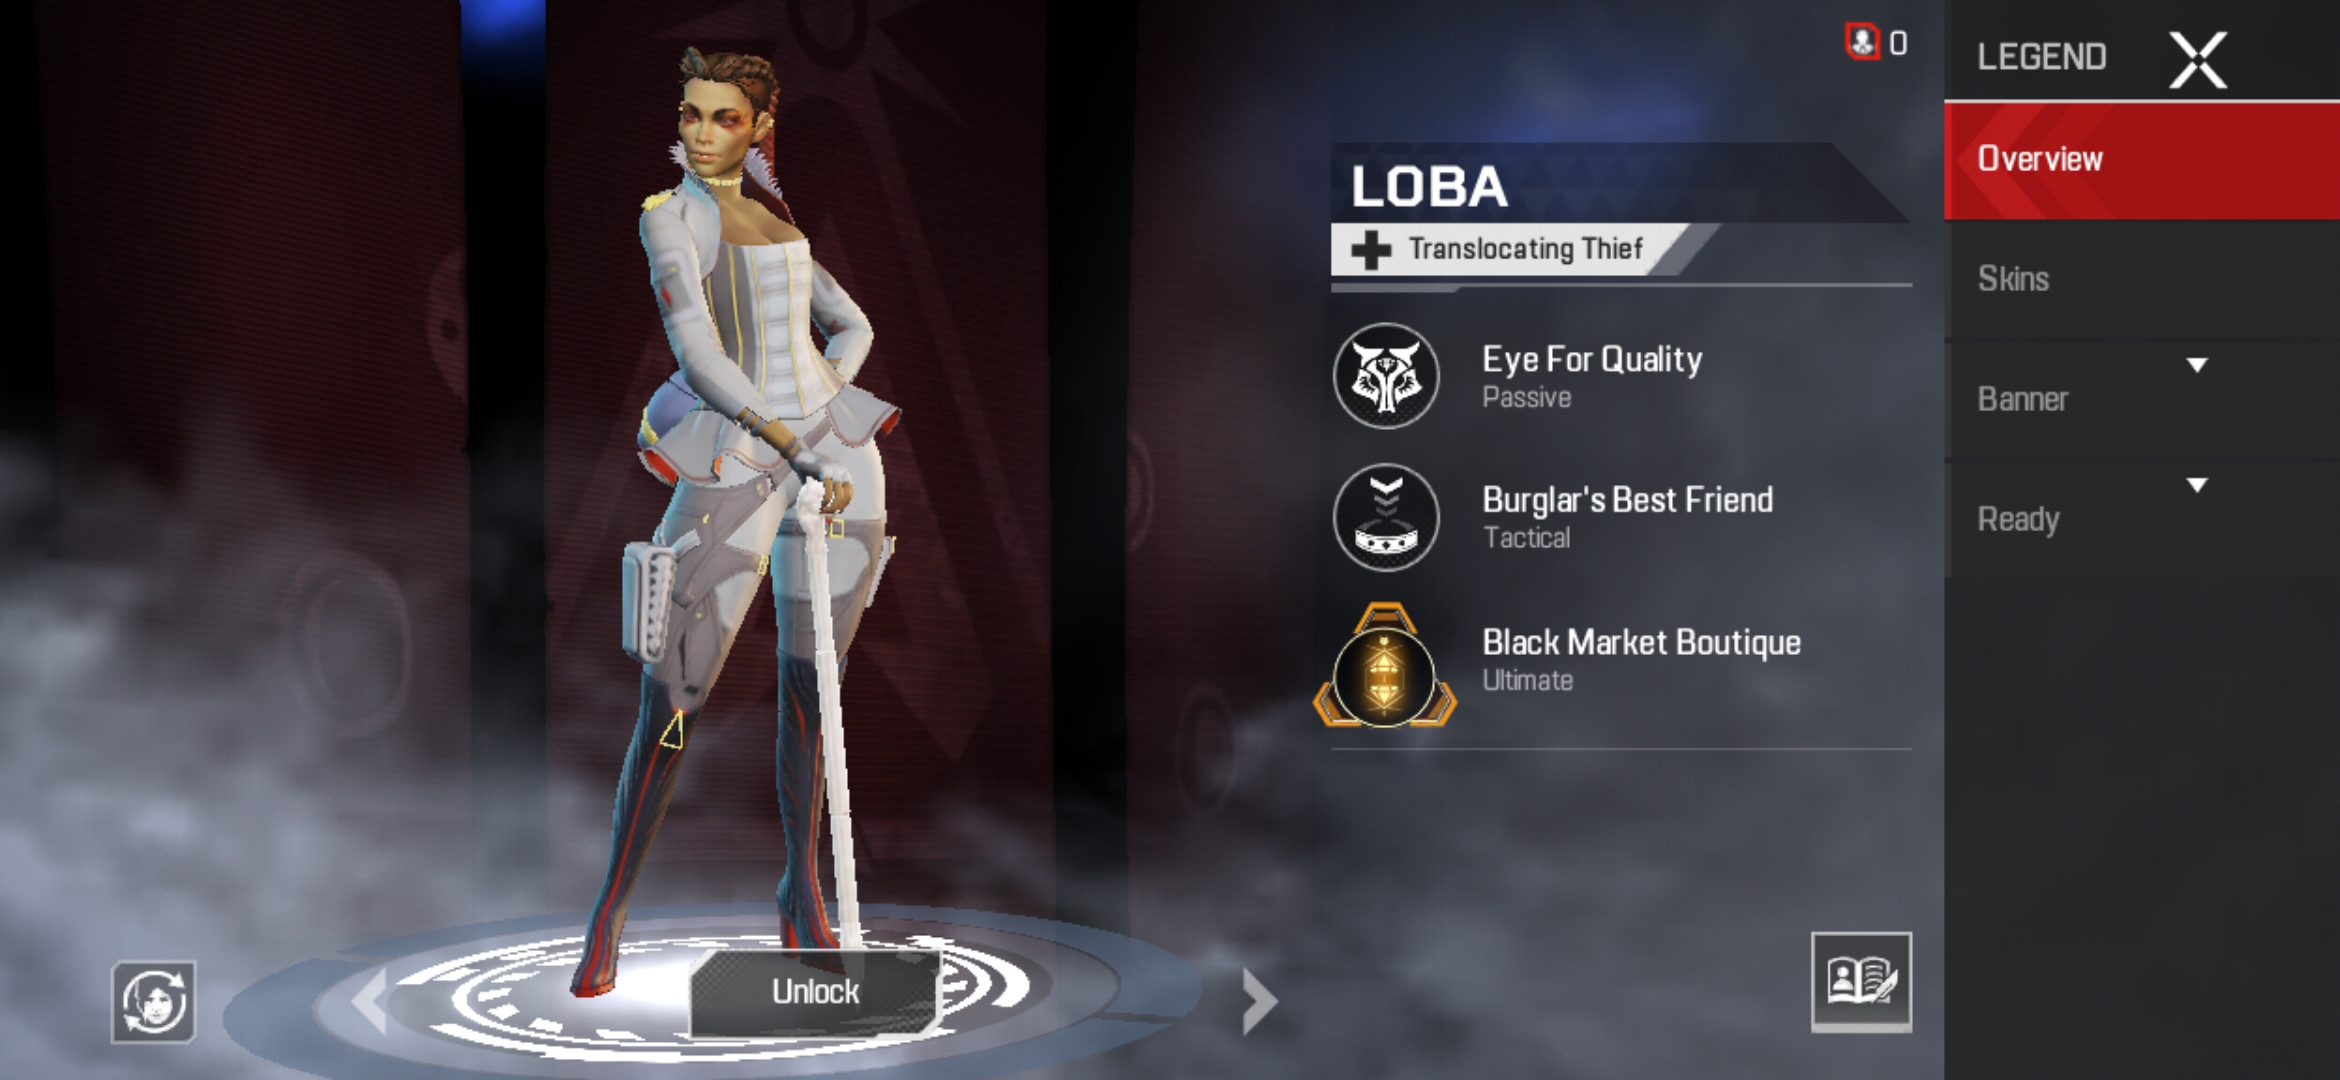 Apex Legends Mobile: New Update adds Loba to the roster